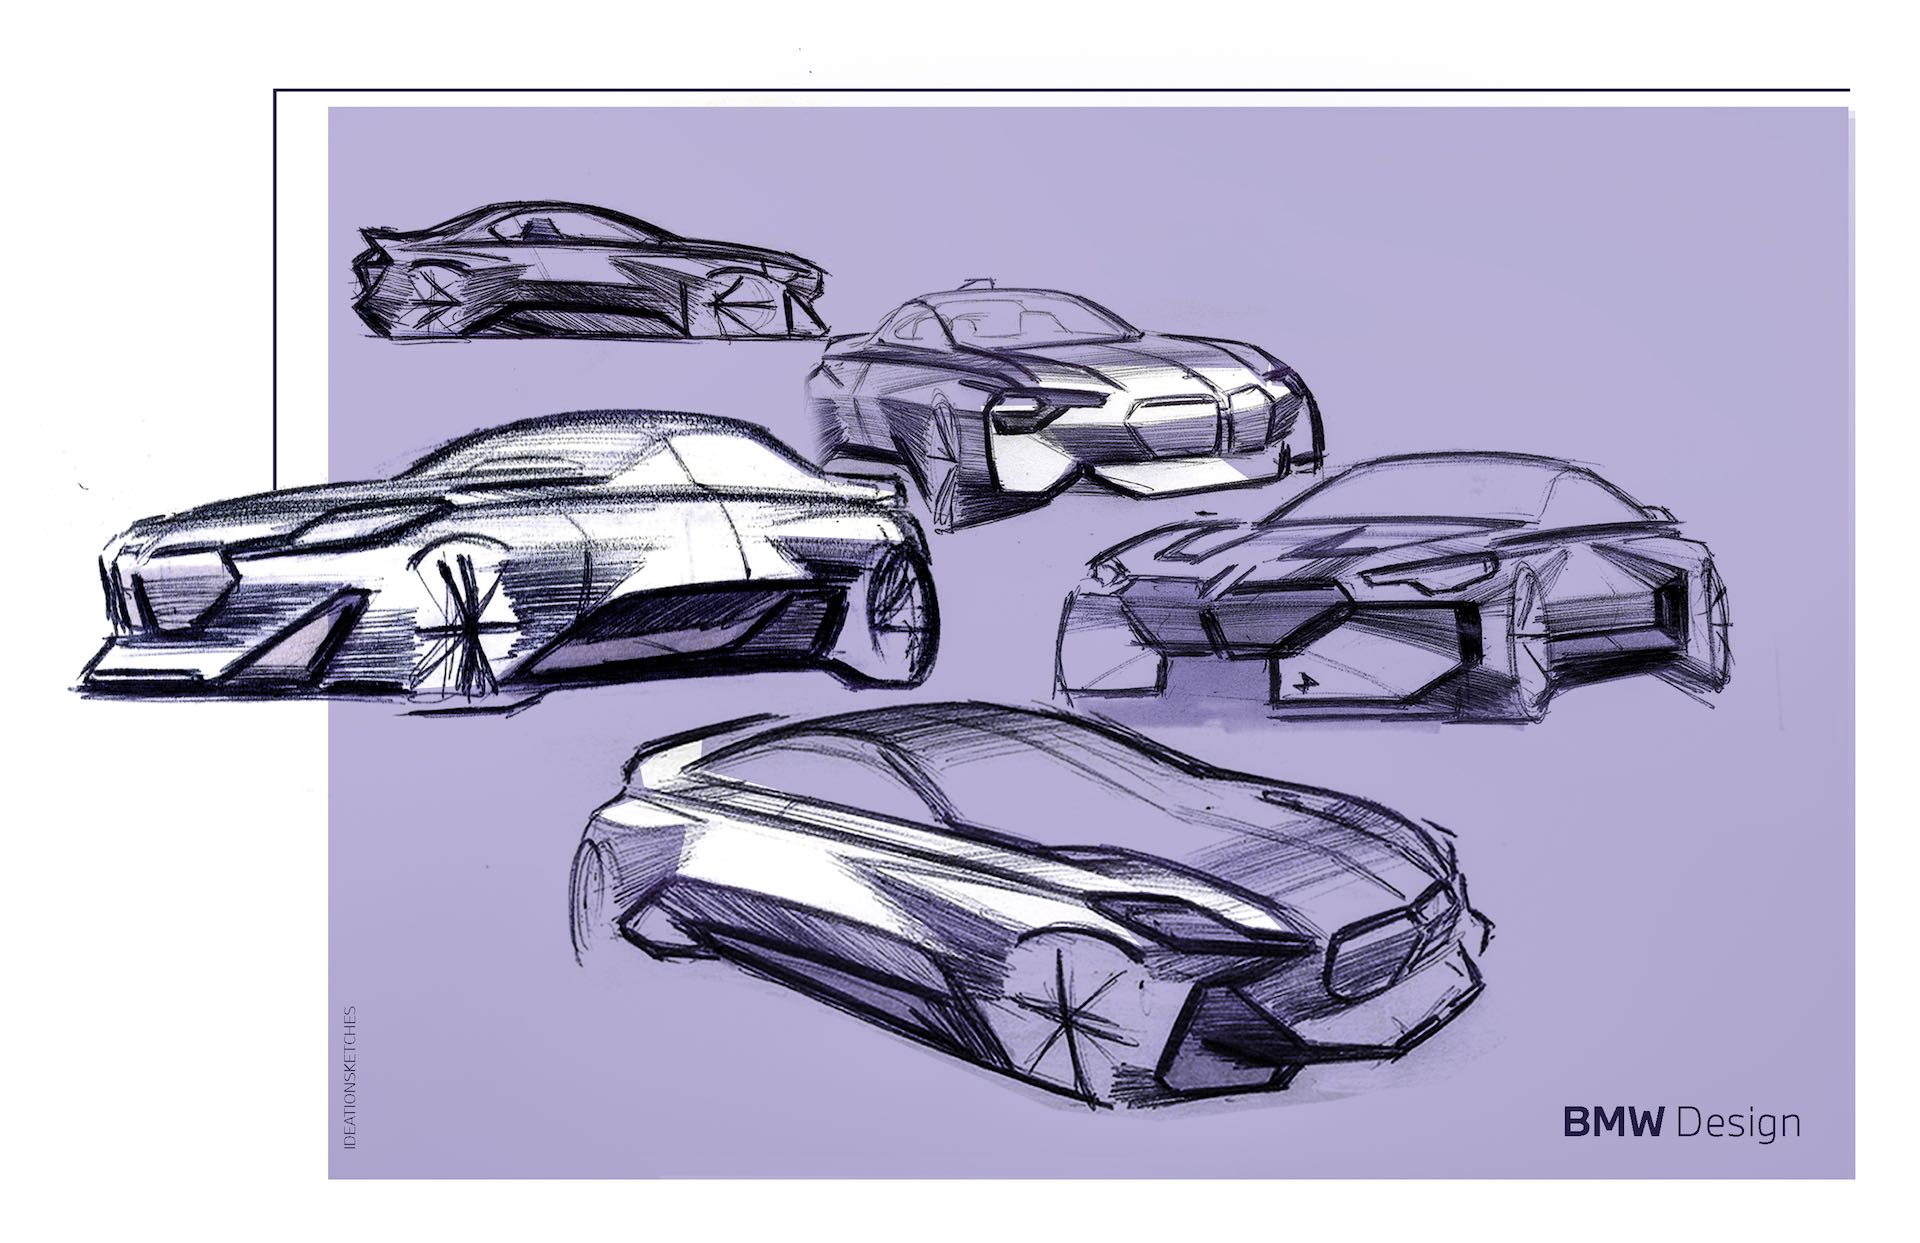 Sketching some front design ideas for the Designing My Dream Porsche Ep 03.  Enjoy your Monday! | Instagram